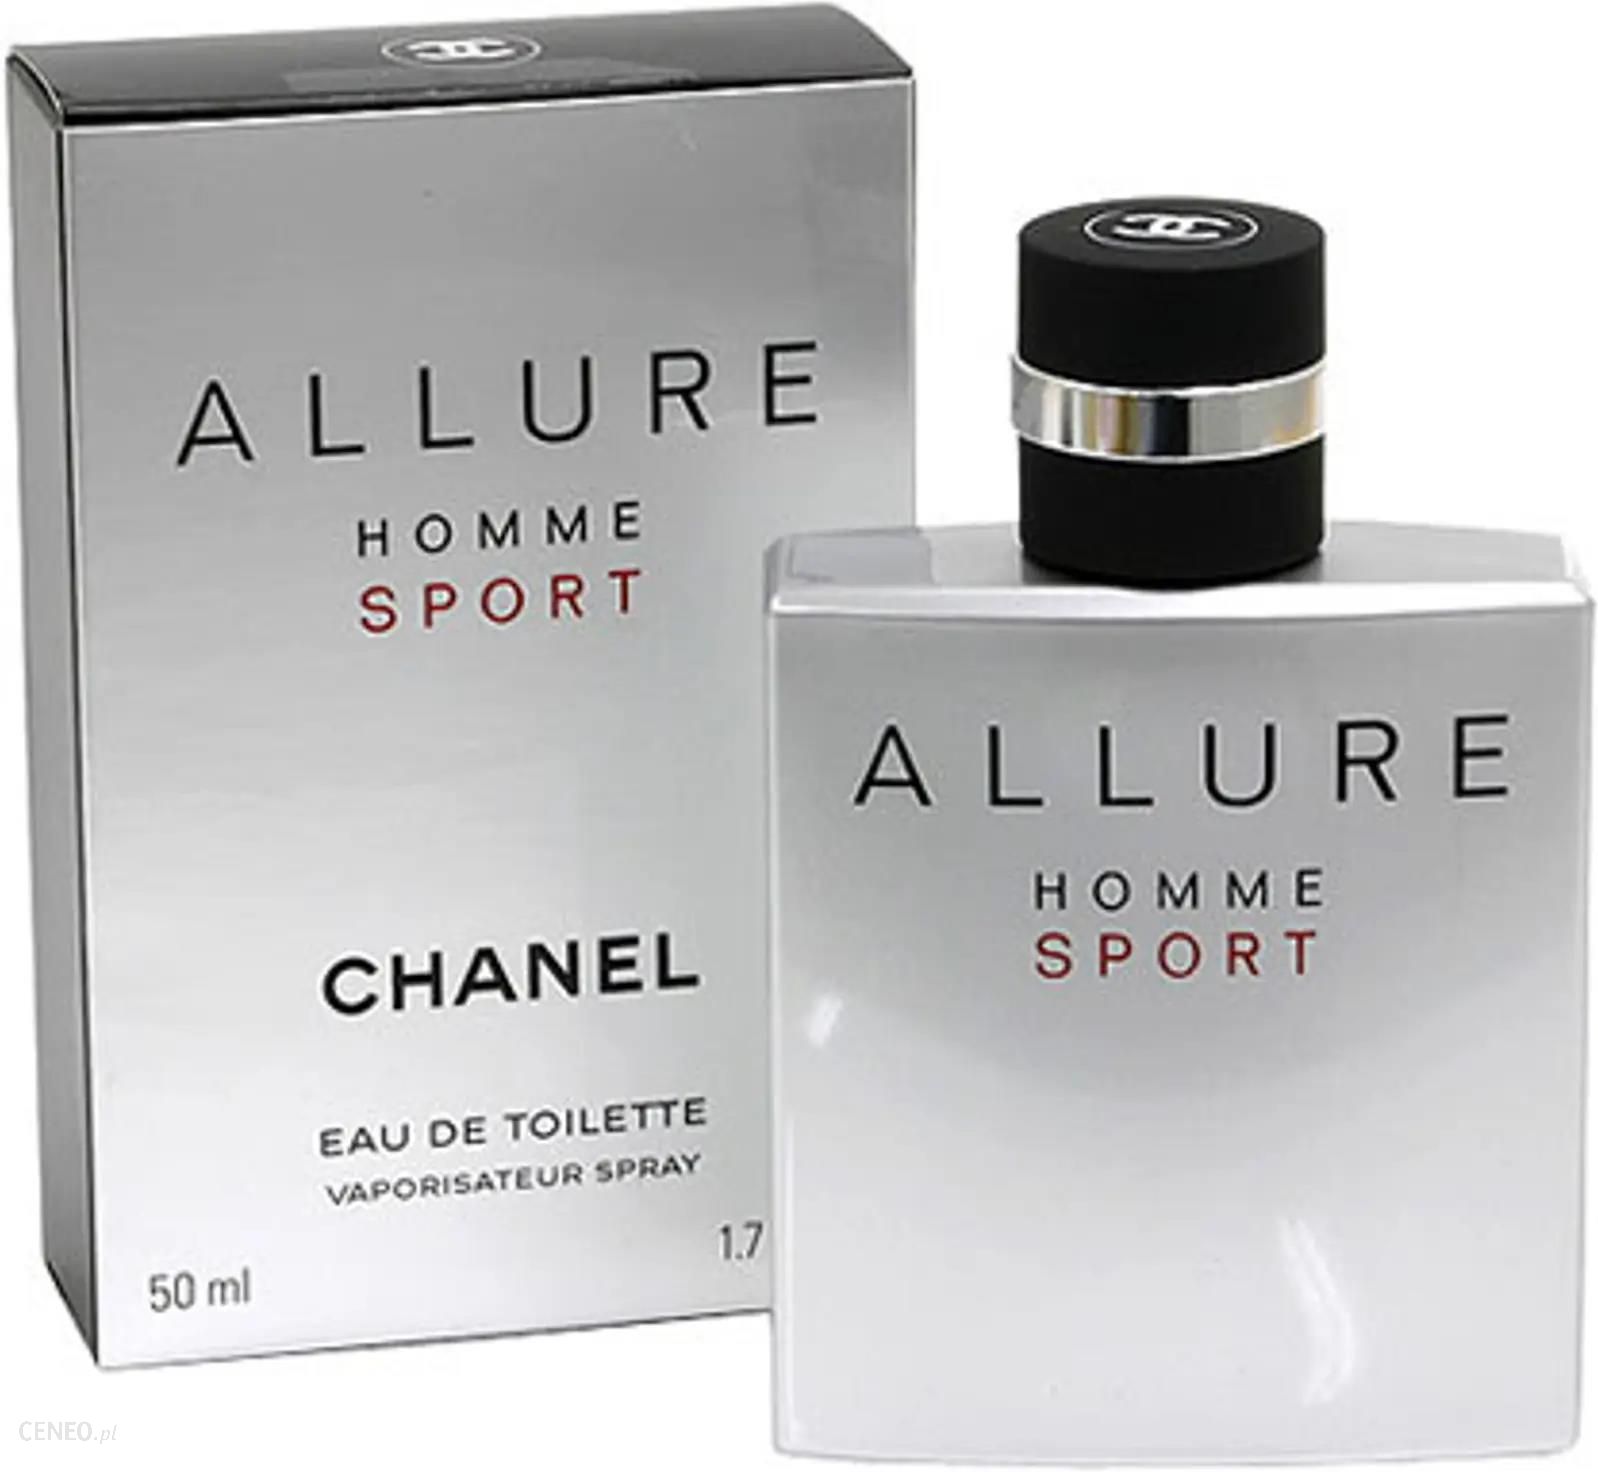 Chanel Allure Homme Sport Cena Clearance  azccomco 1691855664